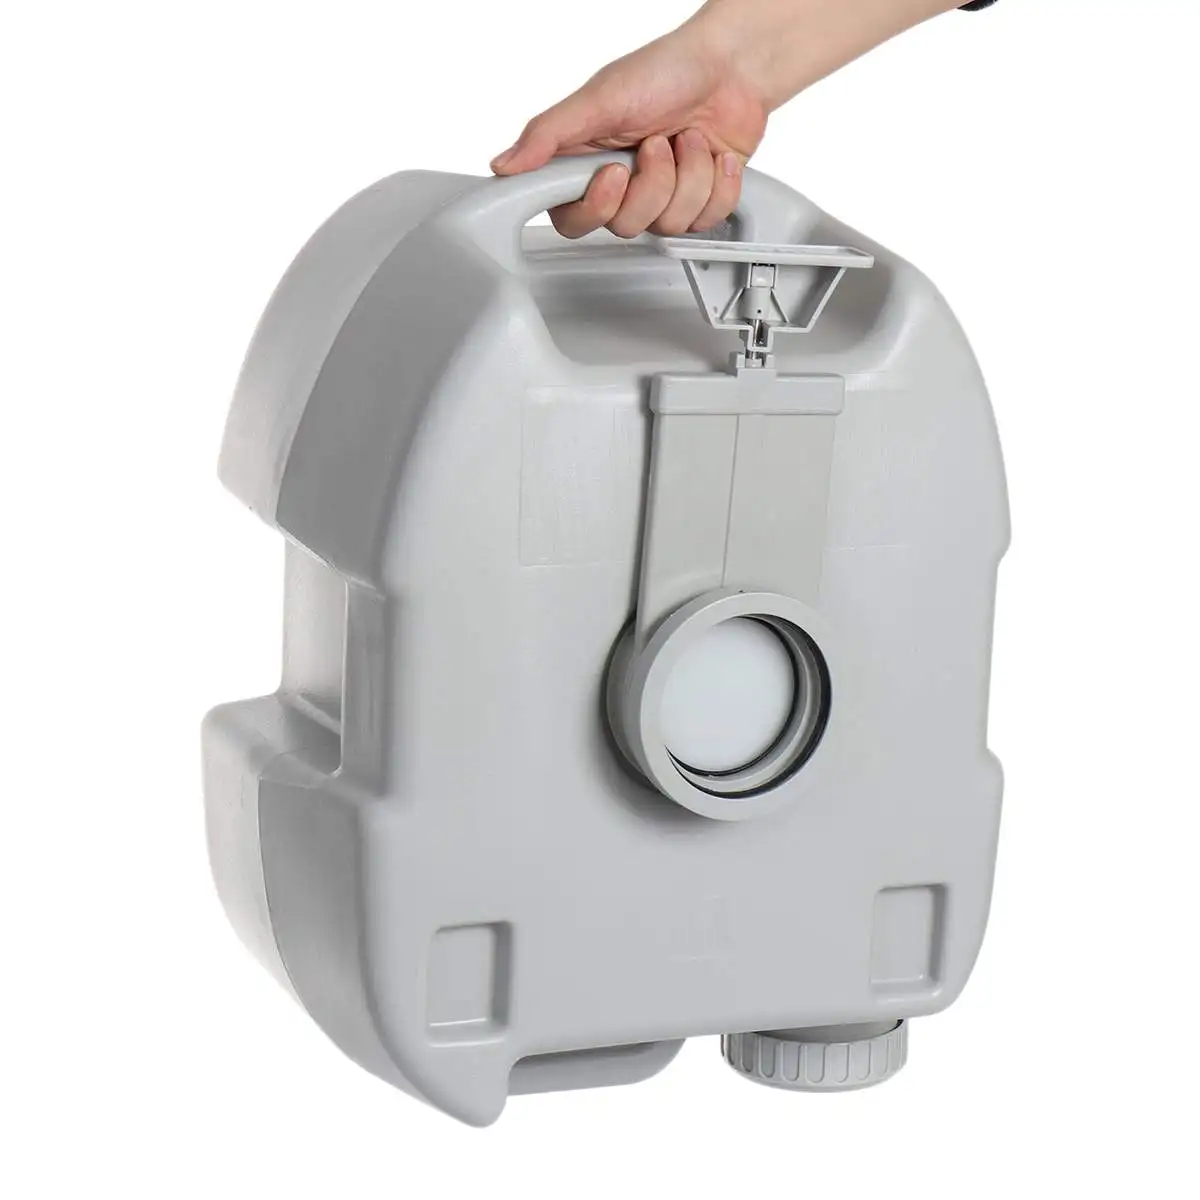 20l portable toilet flush outdoor indoor travel camping adult kids commode potty caravan mobile toilets hospital boat